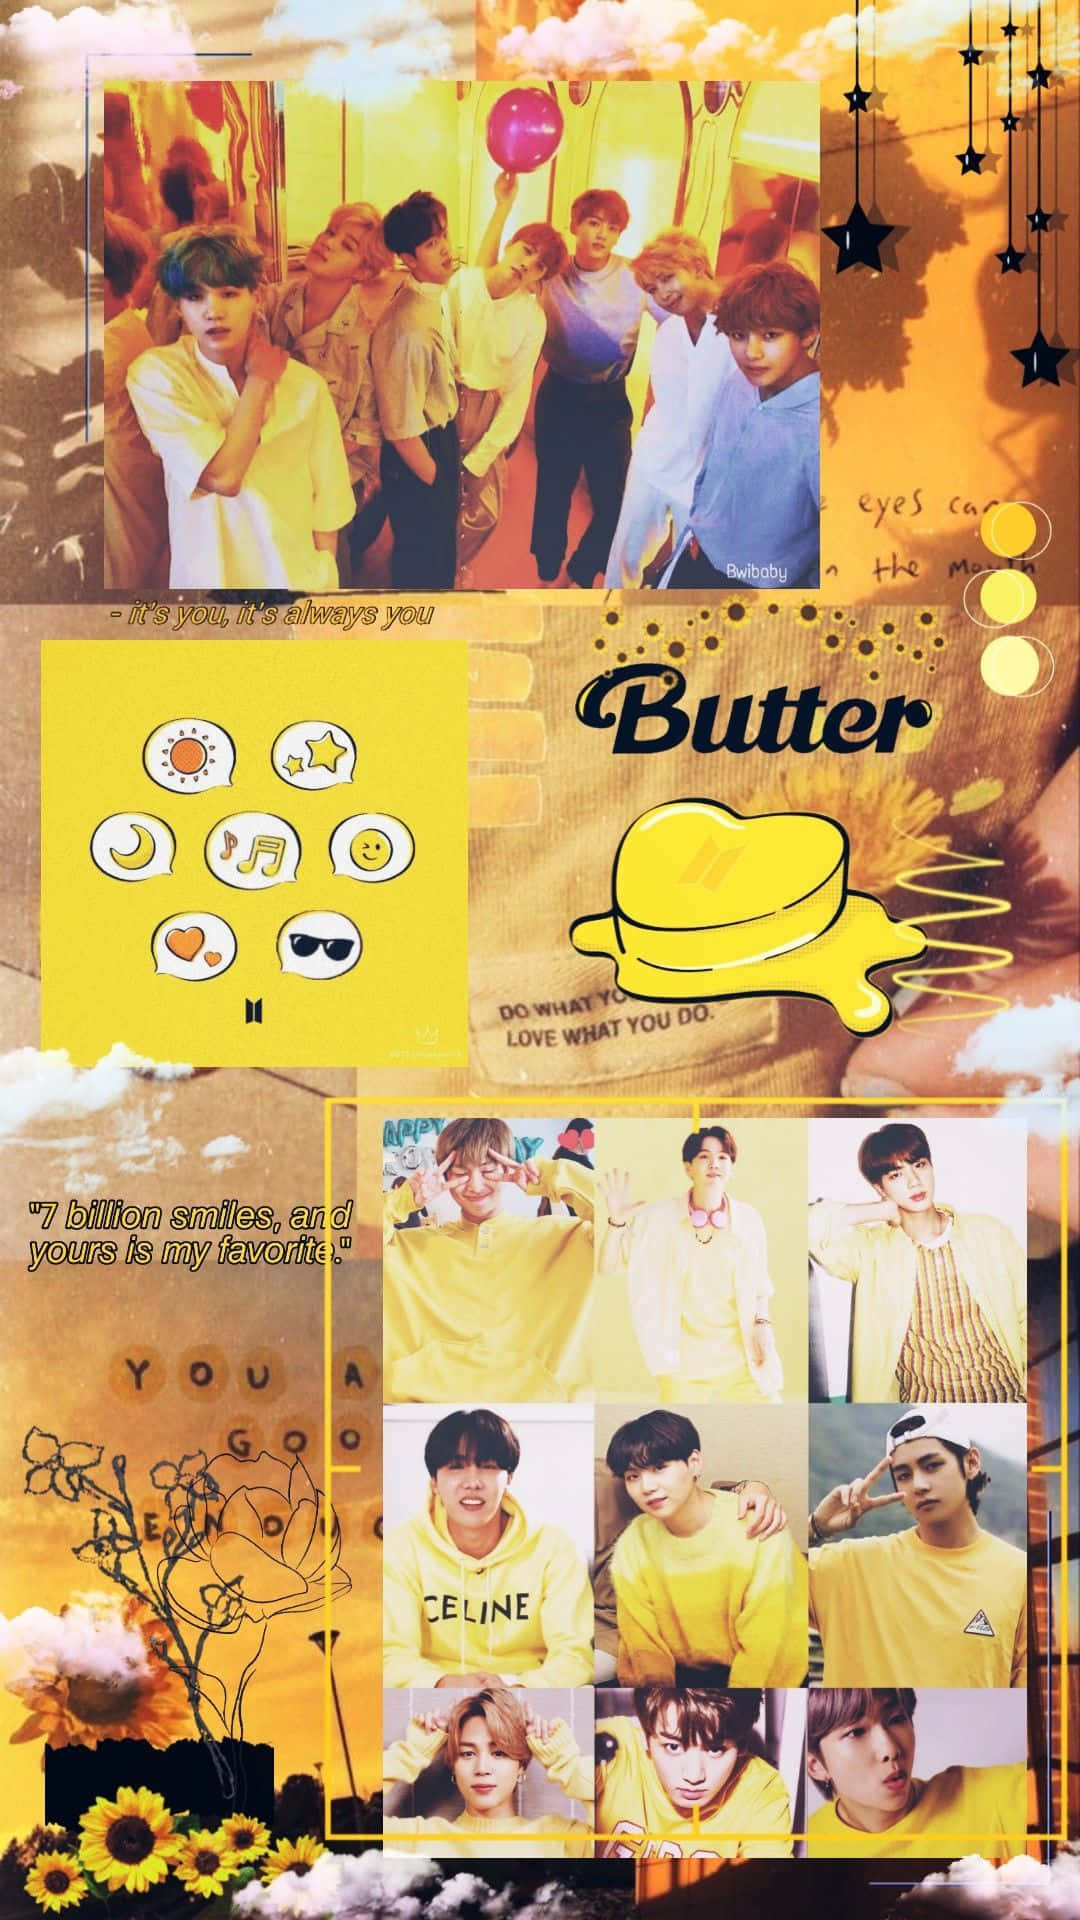 Fans of BTS are Going Gaga Over the New Song, "Butter"!